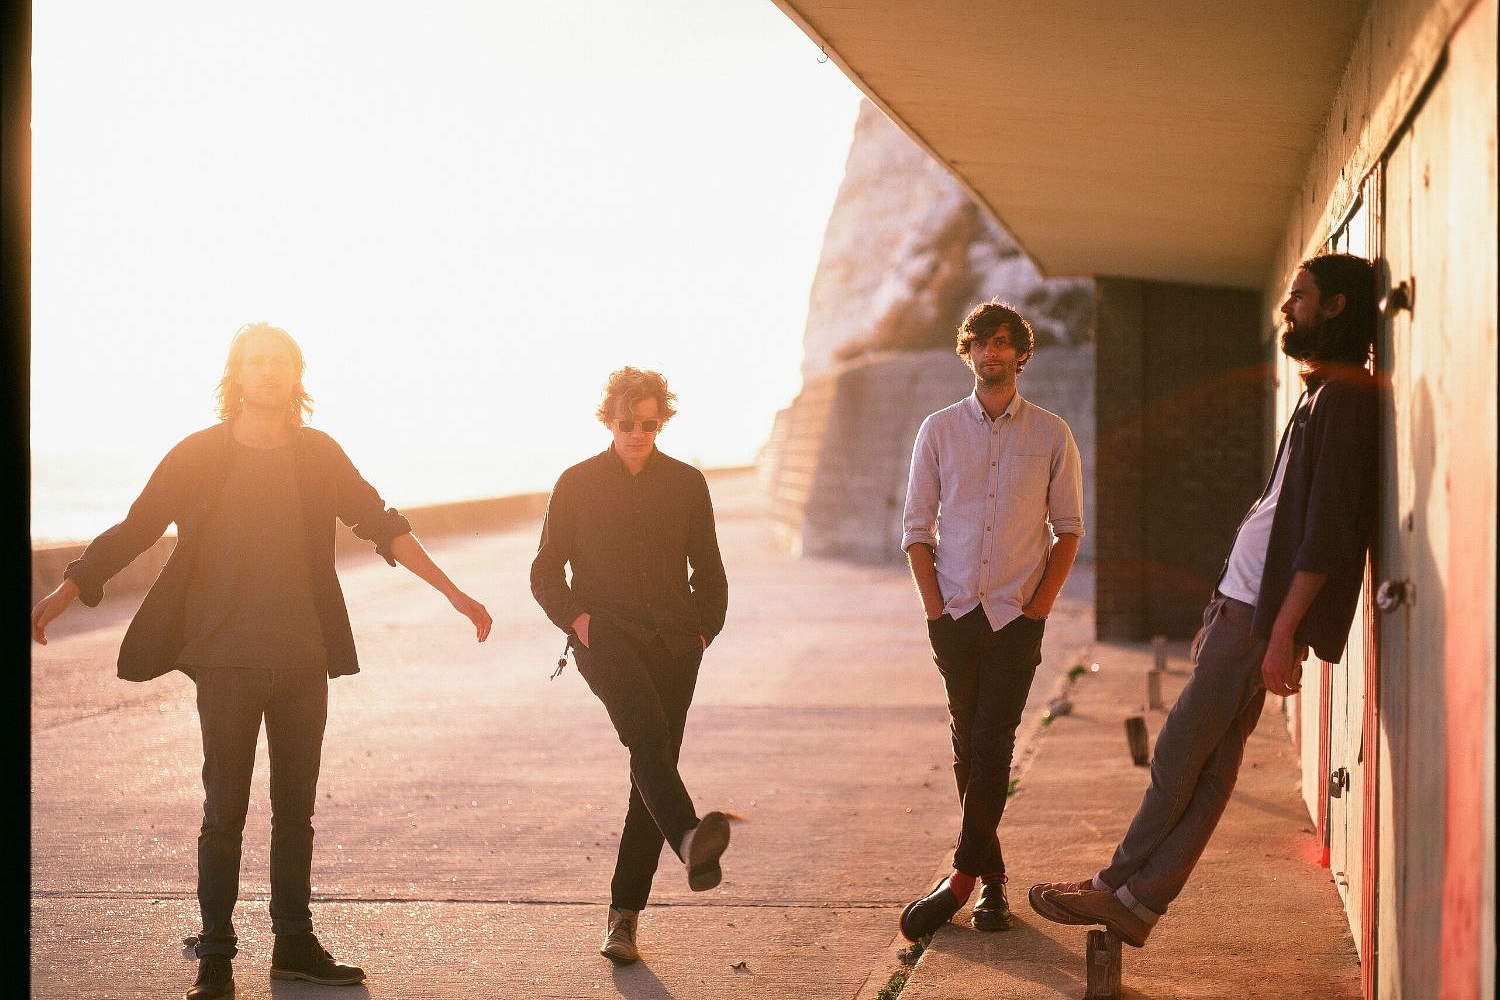 Tall Ships head for ‘Home’ on new single